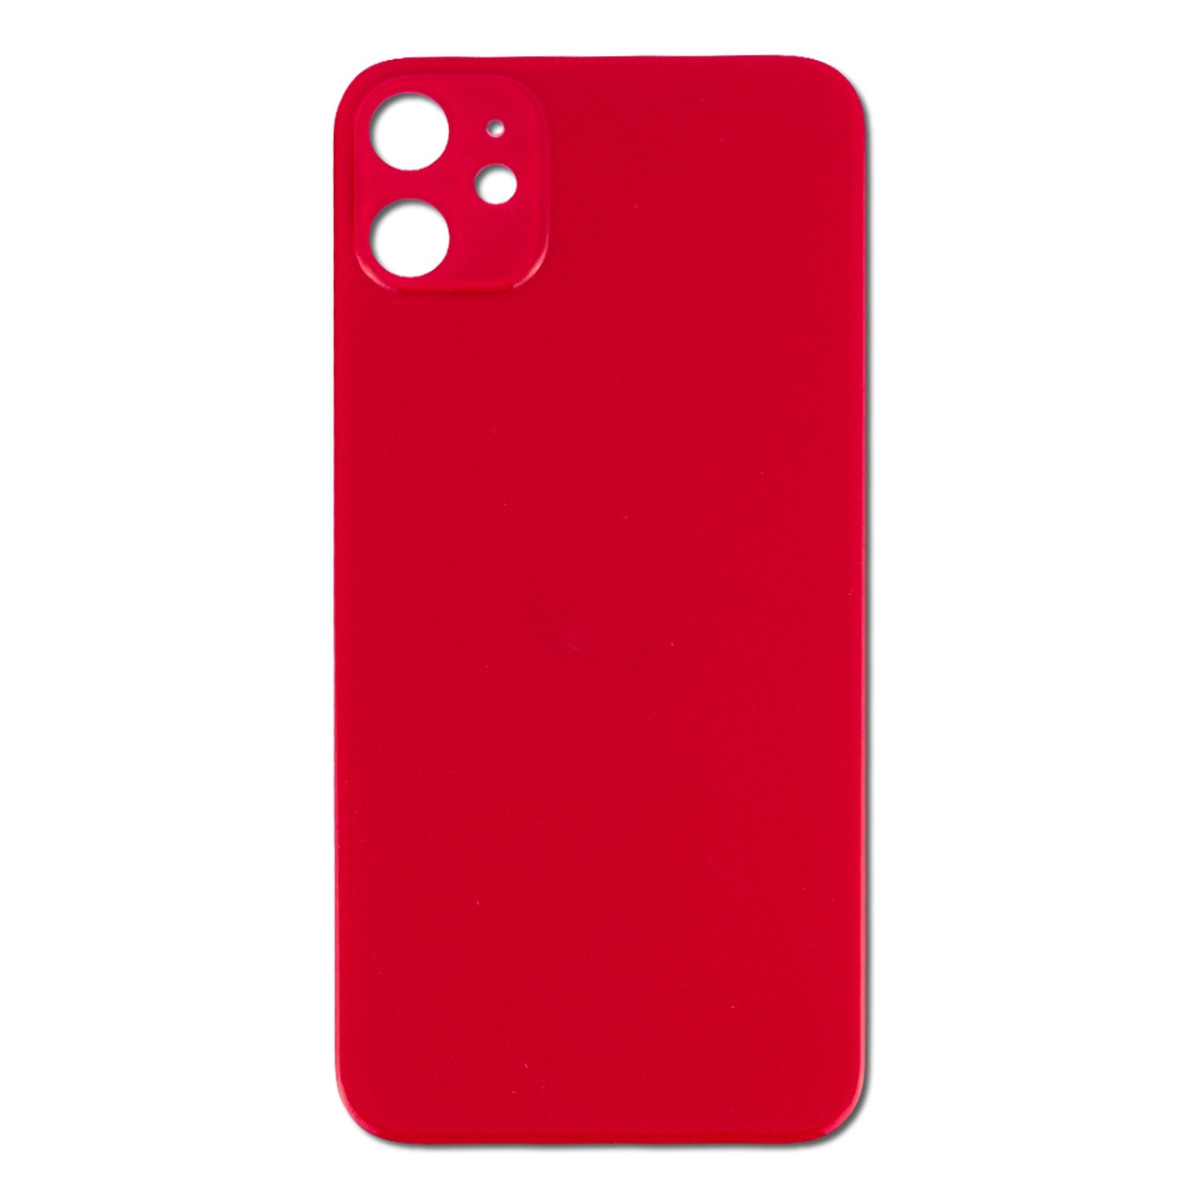 BODY IPHONE 11 BACK GLASS RED-JM051003